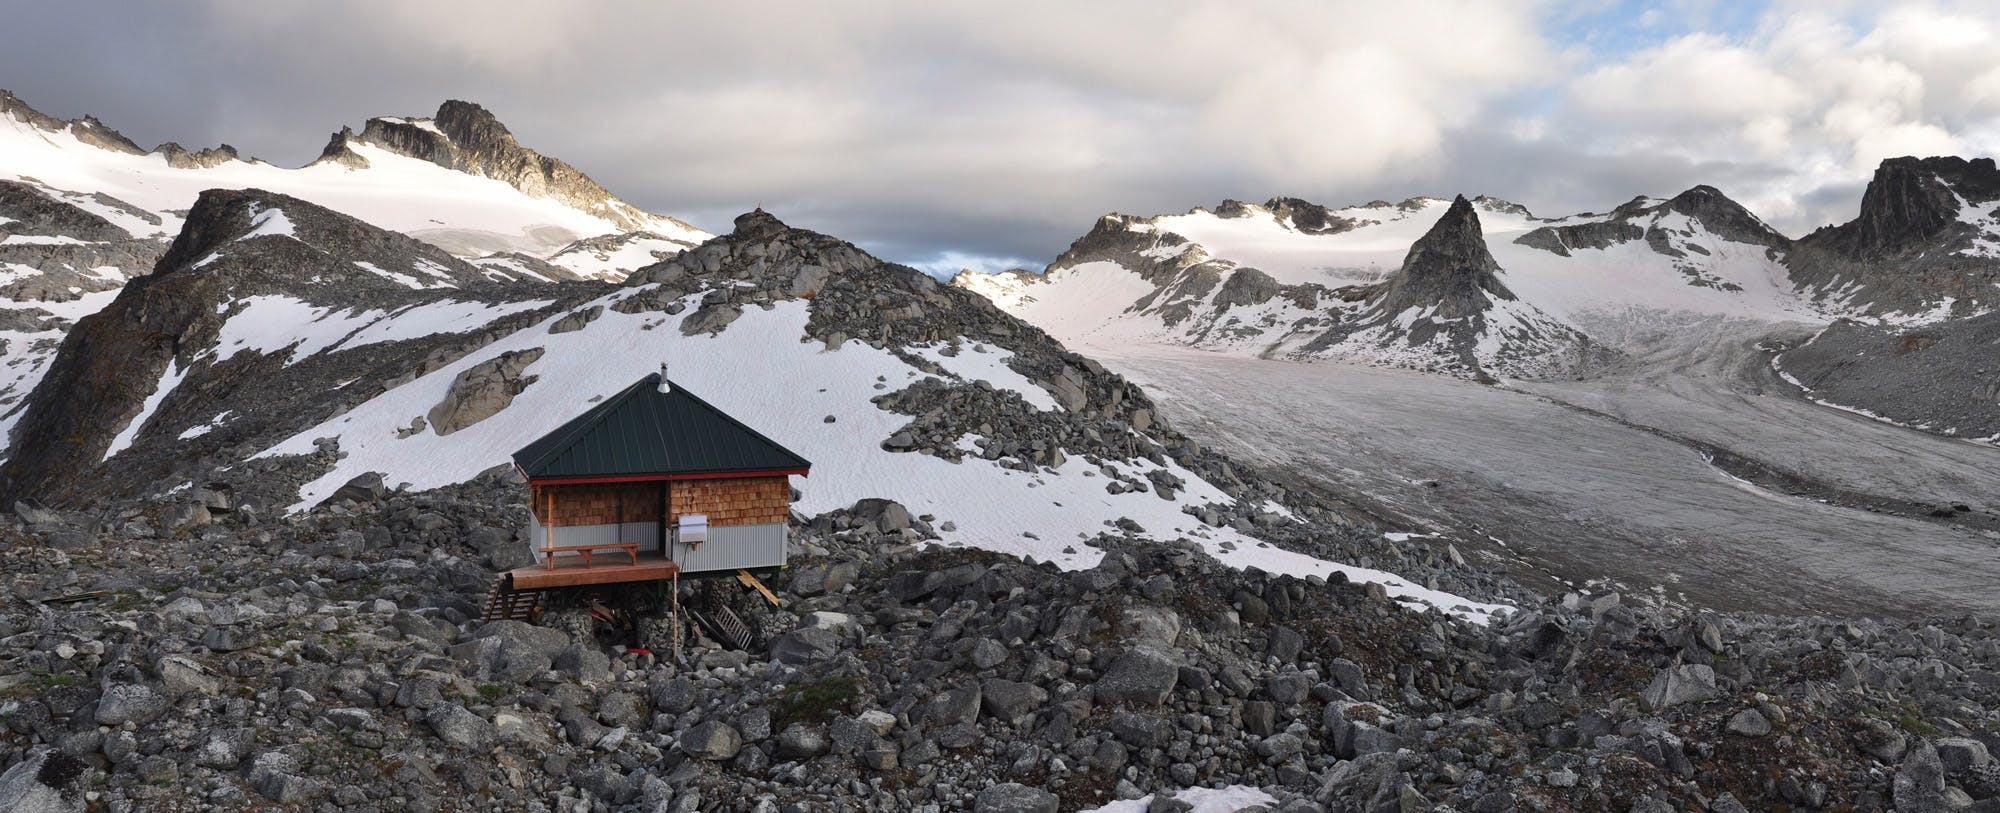 12 of our Favorite Backcountry Ski Huts